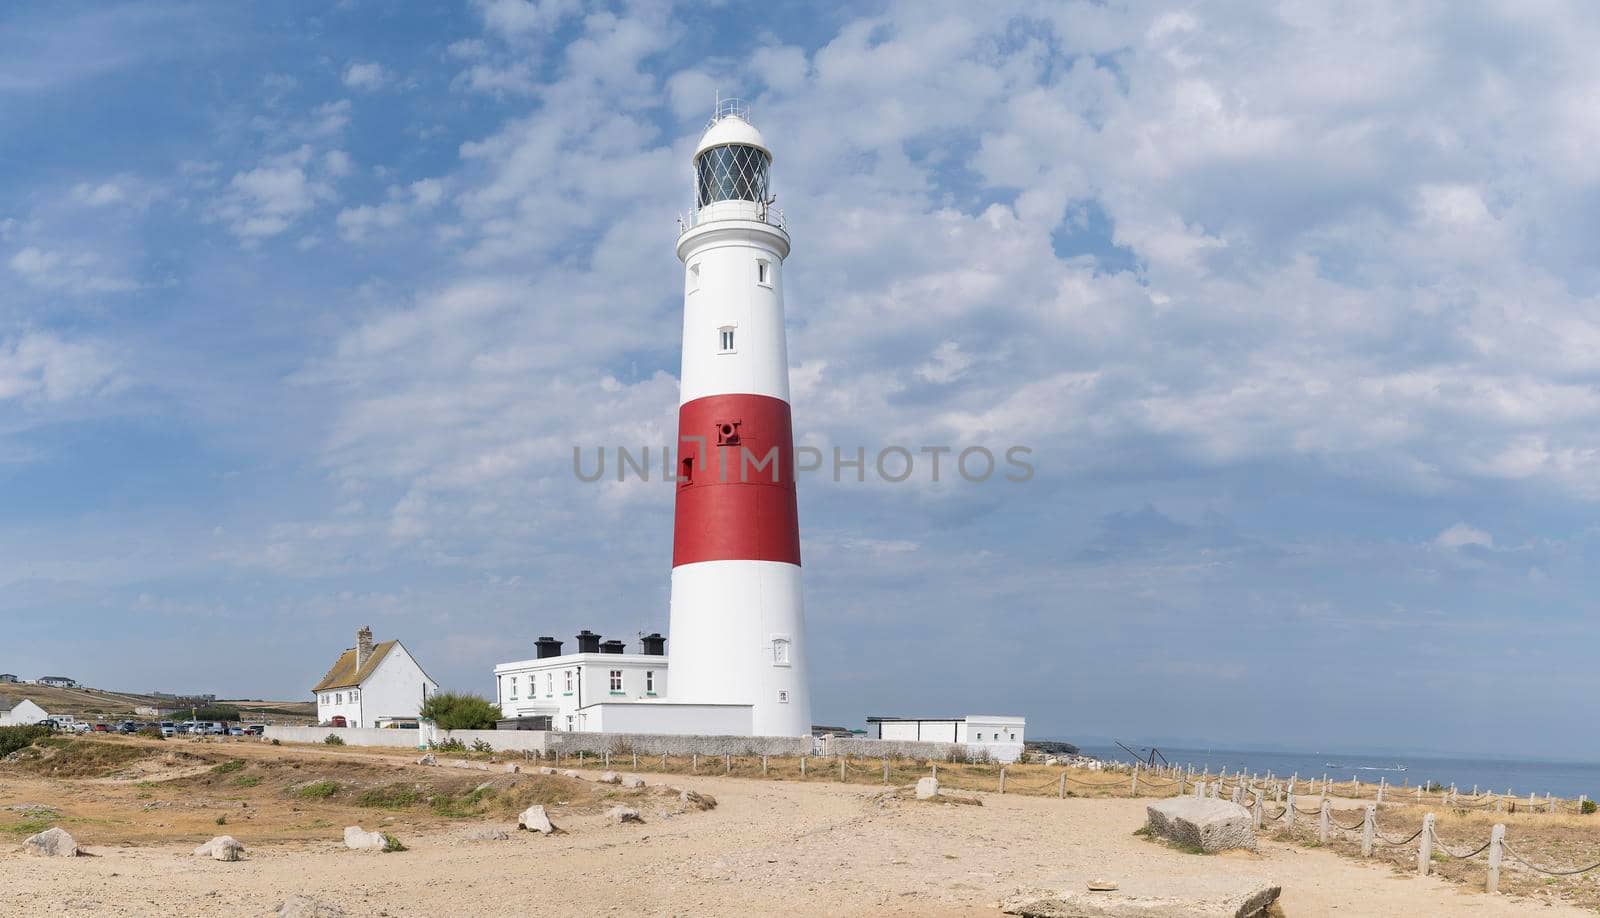 Panoramic view of the Isle of Portland bill lighthouse near Weymouth Dorset coast England UK with a cloudy sky and the ocean in the summer by LeoniekvanderVliet